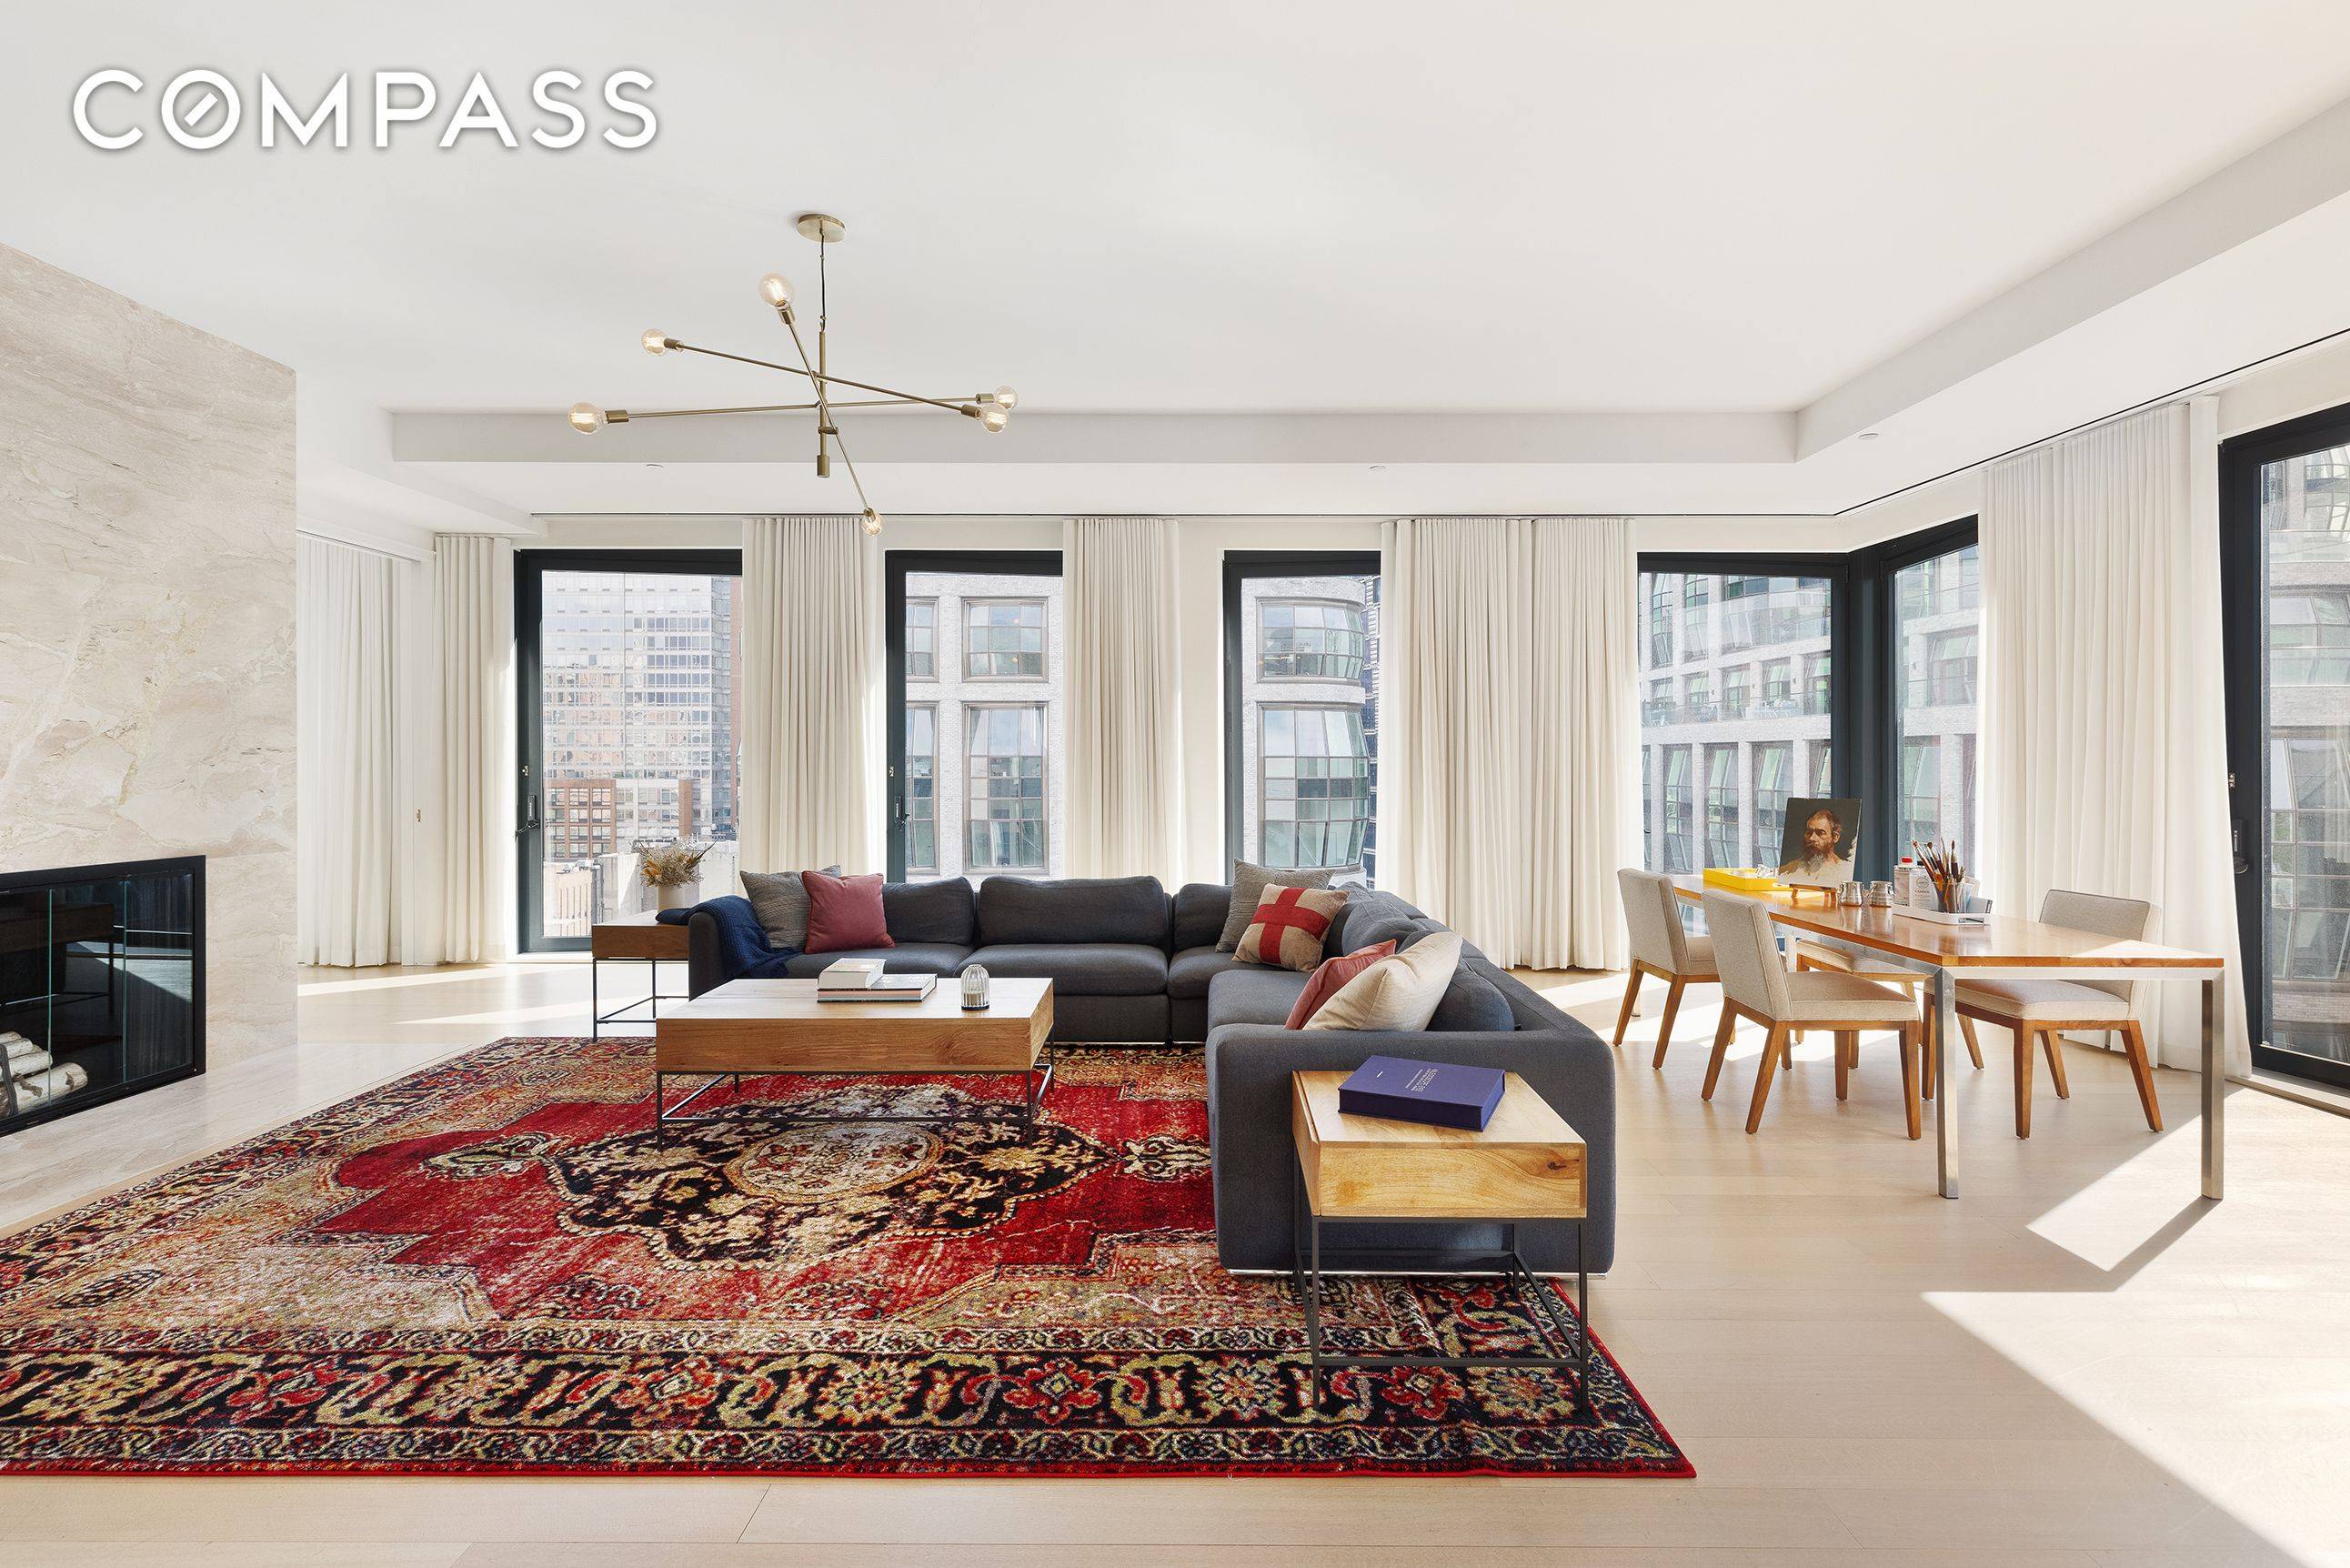 This grandly scaled single floor private floor penthouse with two terraces in the heart of West Chelsea soars above the Highline Park, just moments from The Hudson River Park and ...